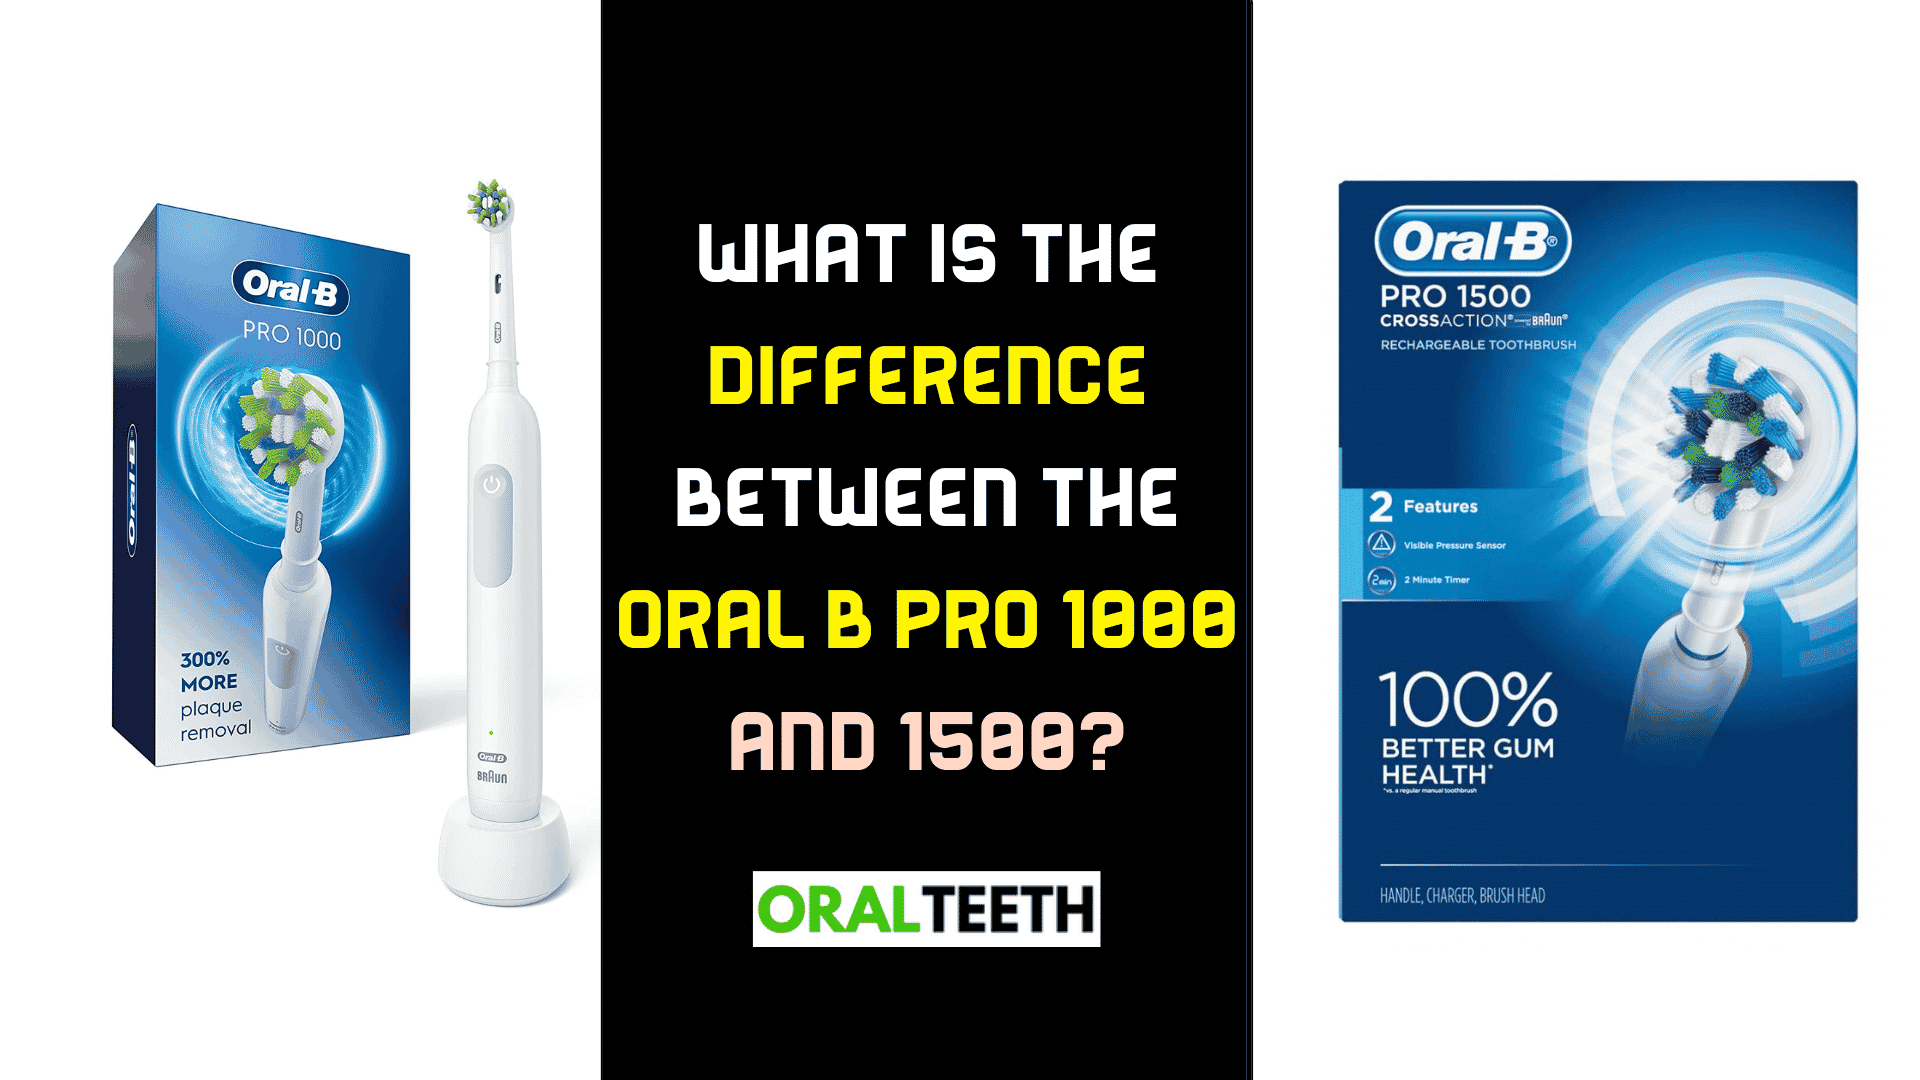 What Is The Difference Between The Oral B Pro 1000 And 1500